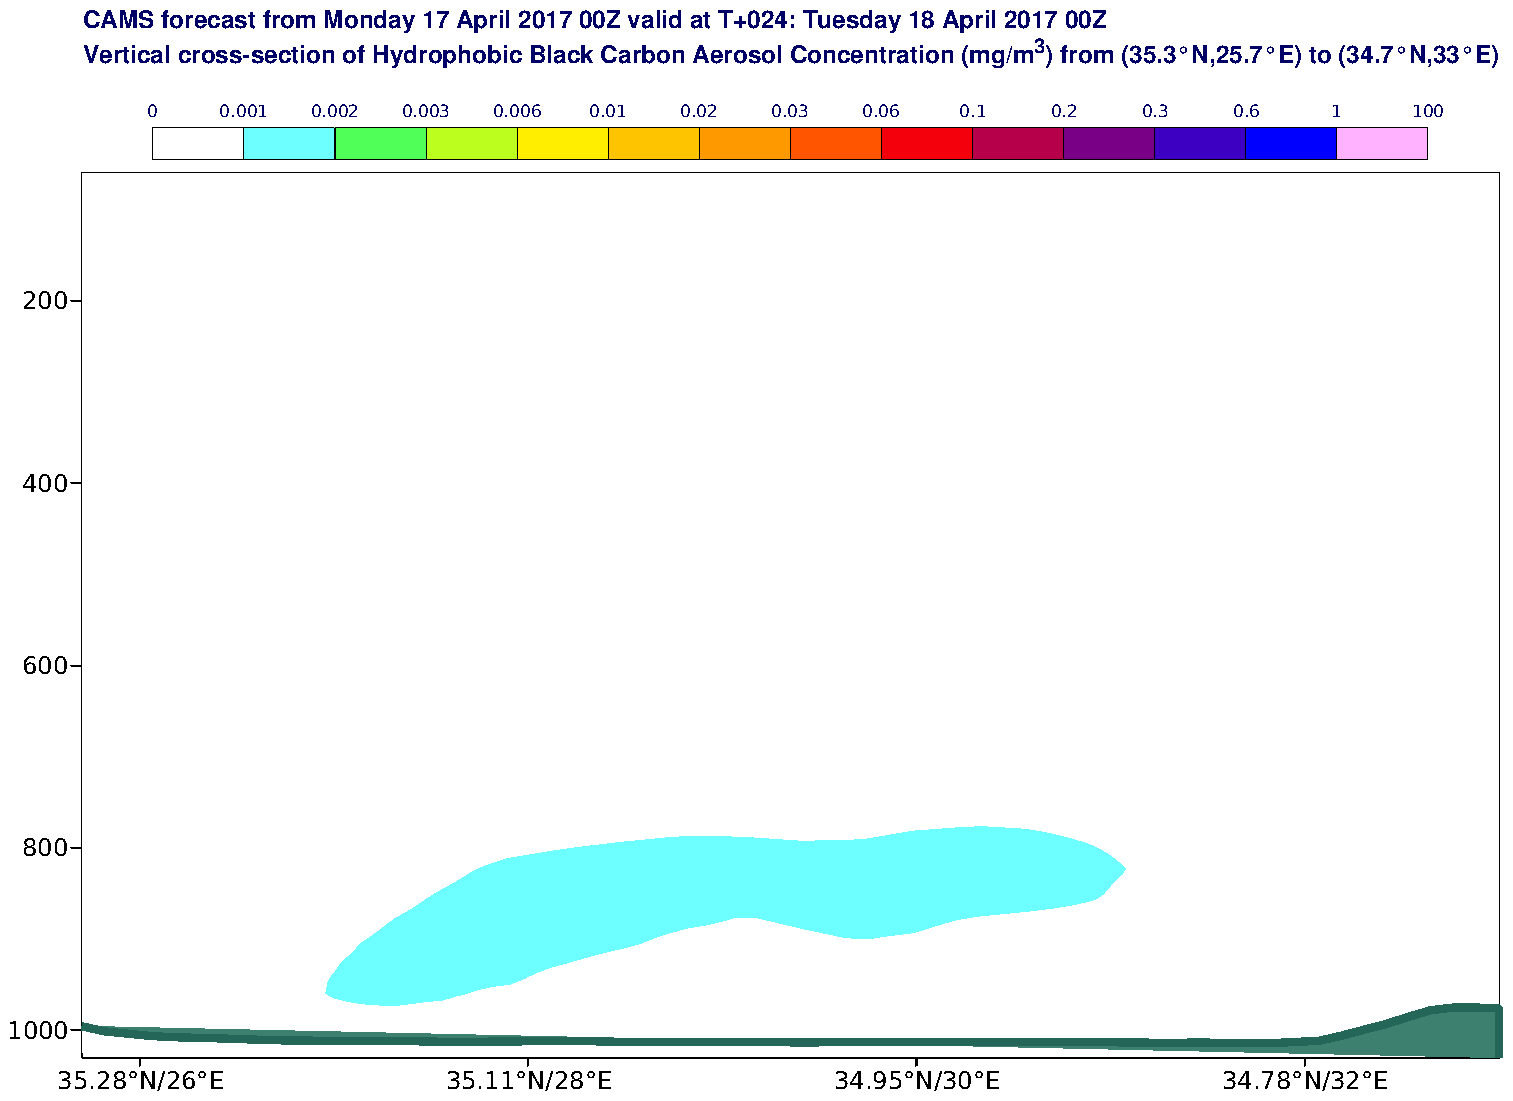 Vertical cross-section of Hydrophobic Black Carbon Aerosol Concentration (mg/m3) valid at T24 - 2017-04-18 00:00